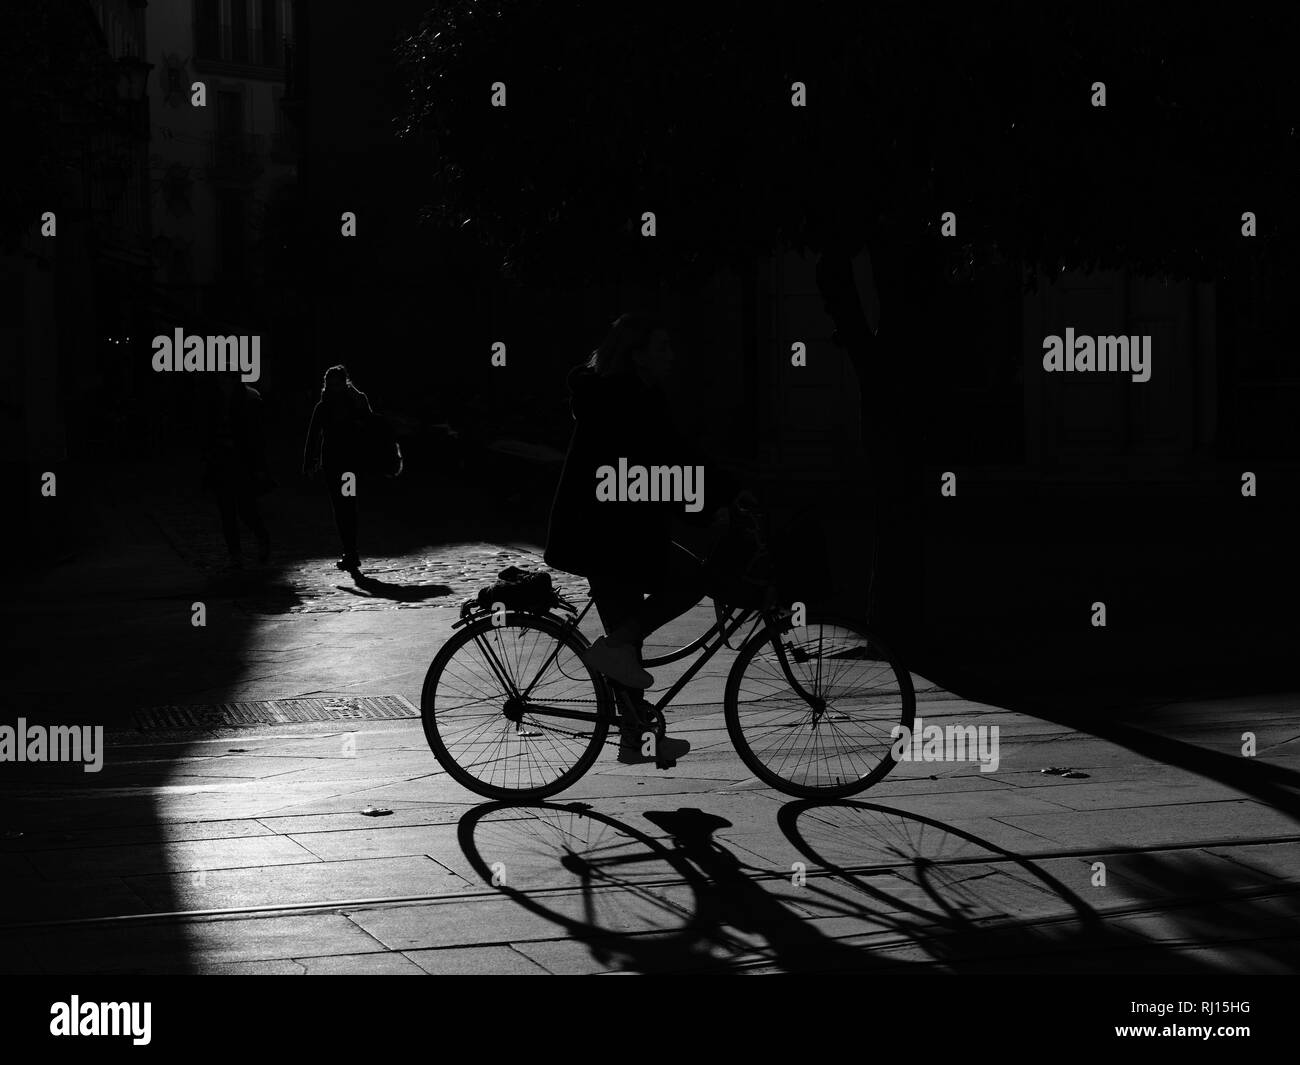 Strong Graphic Shadow Silhouettes of cyclists on bikes in pool of sunlight on street Seville Spain Stock Photo